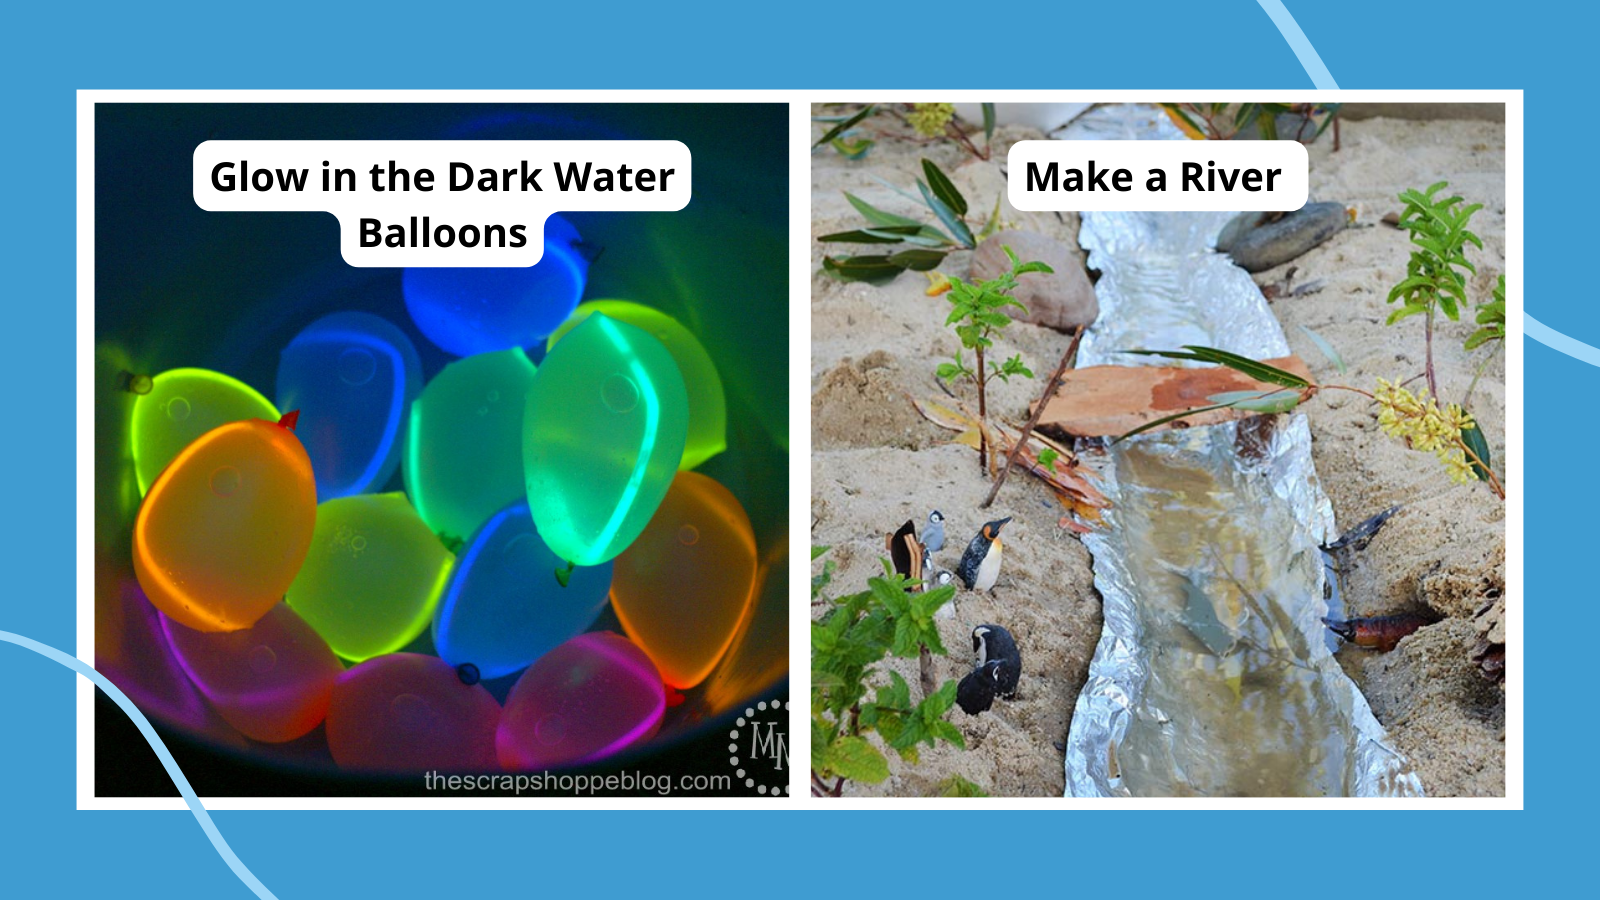 51 Splash-tastic Water Activities for Summertime Fun and Learning